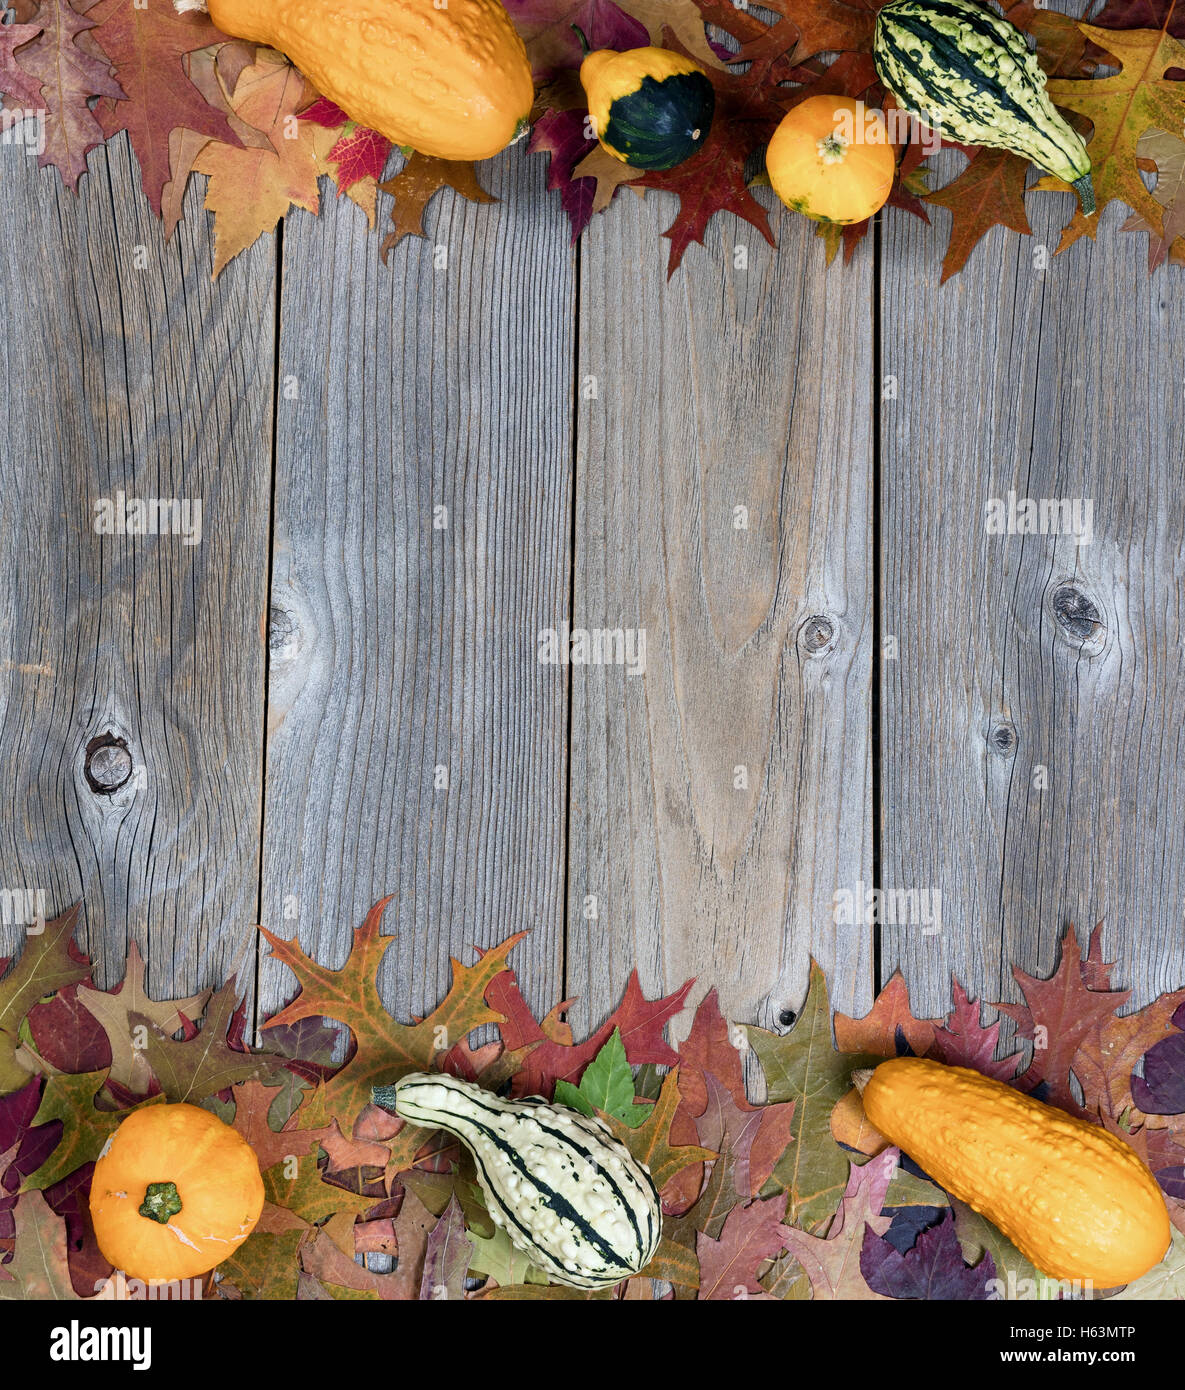 Overhead view of real seasonal autumn gourds and leaves with upper and lower borders on rustic wooden boards. Stock Photo